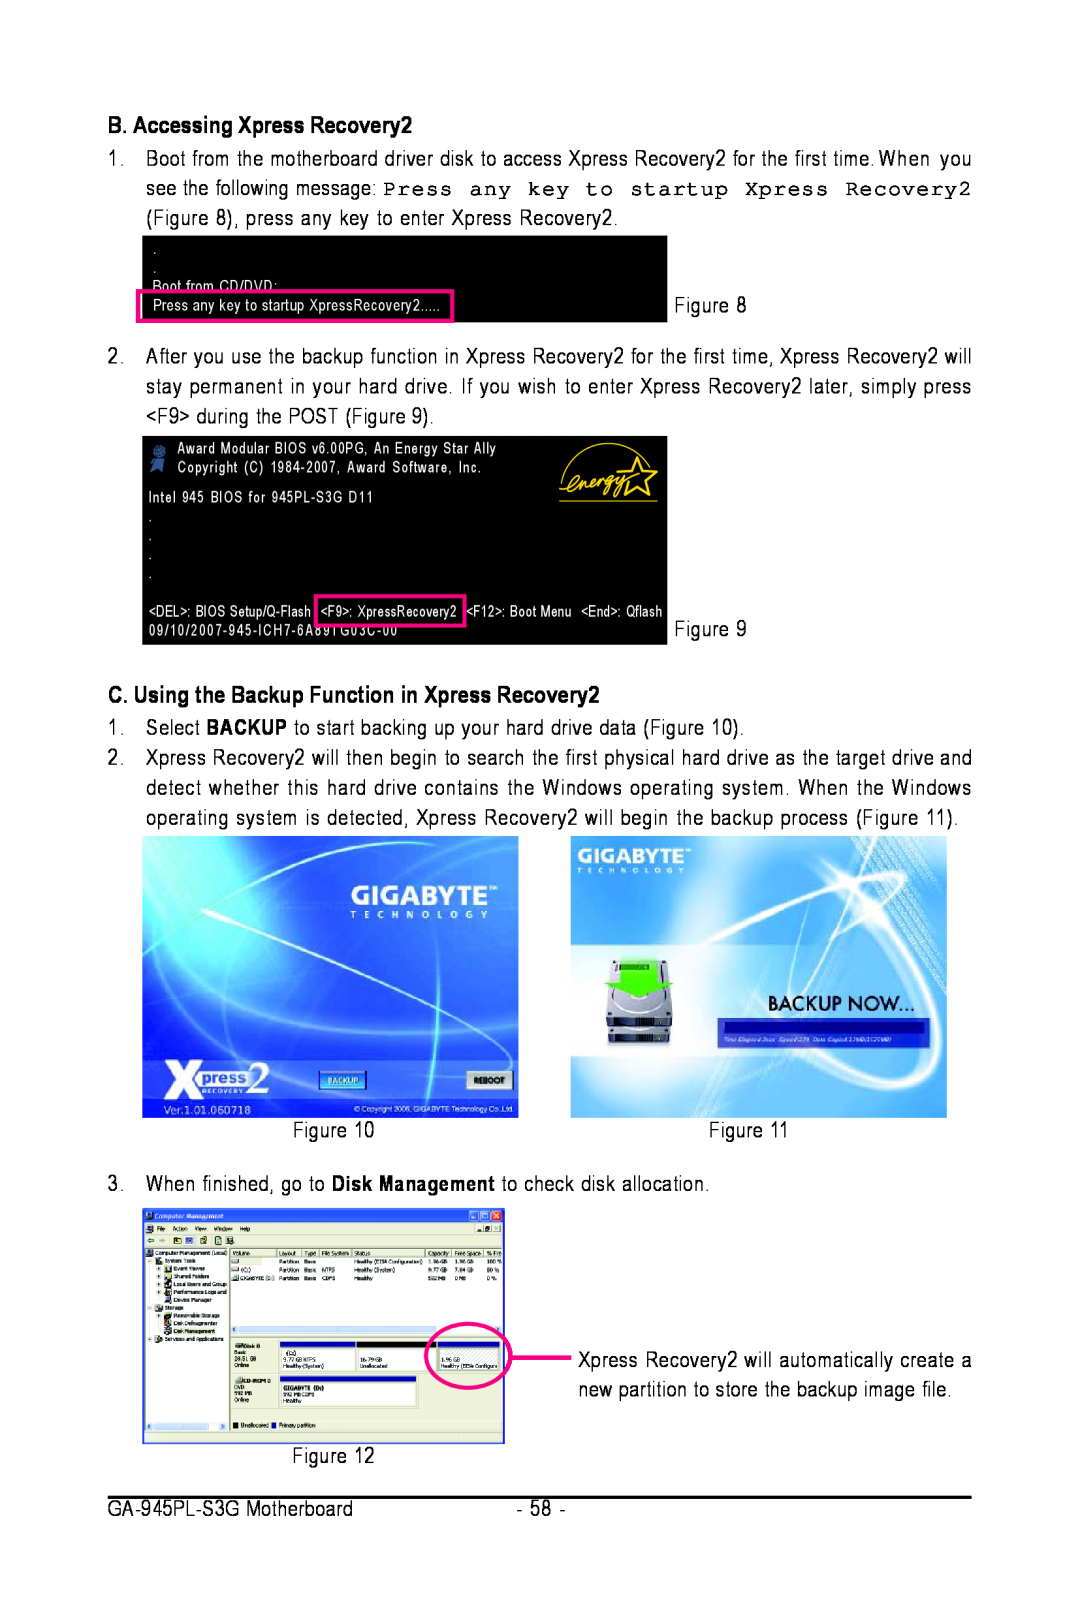 Intel GA-945PL-S3G user manual B. Accessing Xpress Recovery2, C. Using the Backup Function in Xpress Recovery2 